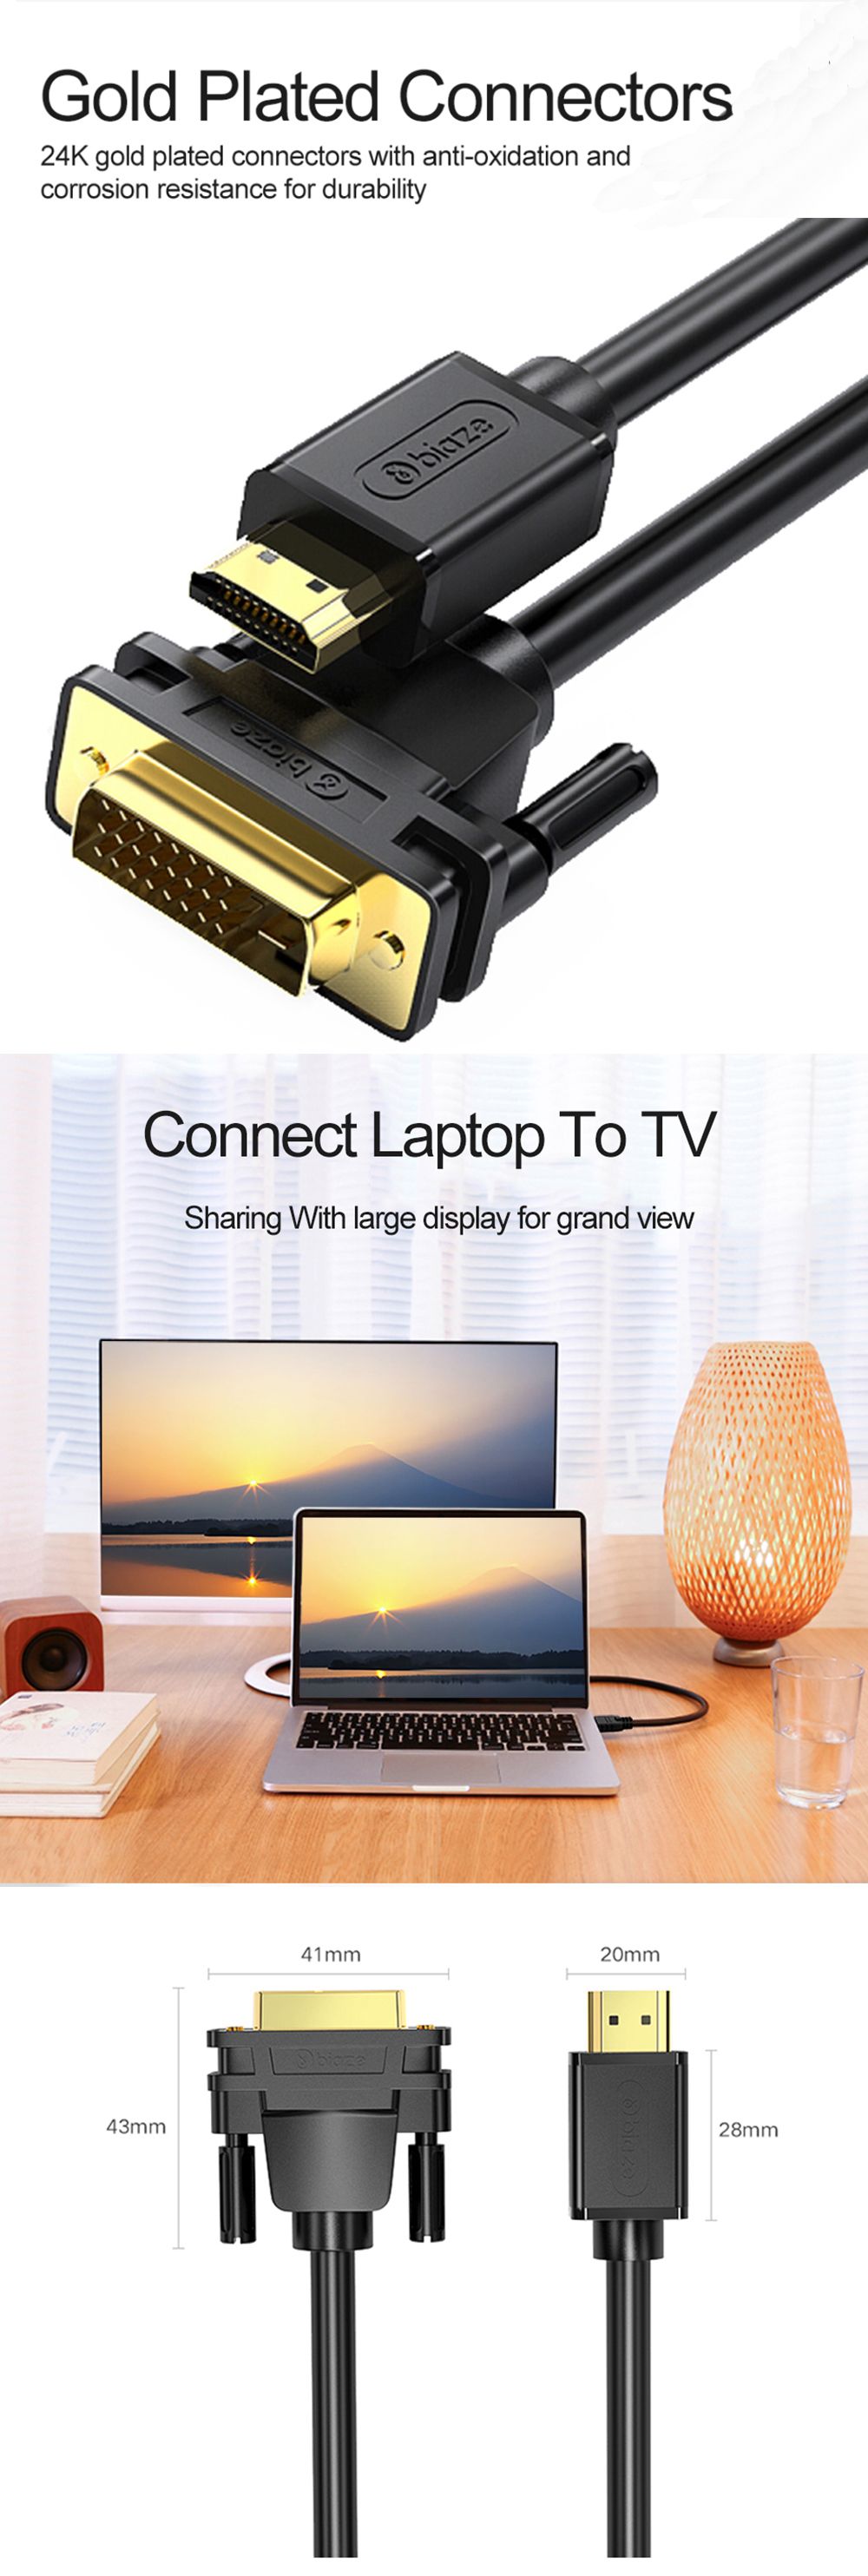 Biaze-HD-to-DVI241-Bidirectional-Transfers-Gold-Plated-Connector-Adapter-Video-Cable-for-HDTV-PC-Pro-1568112